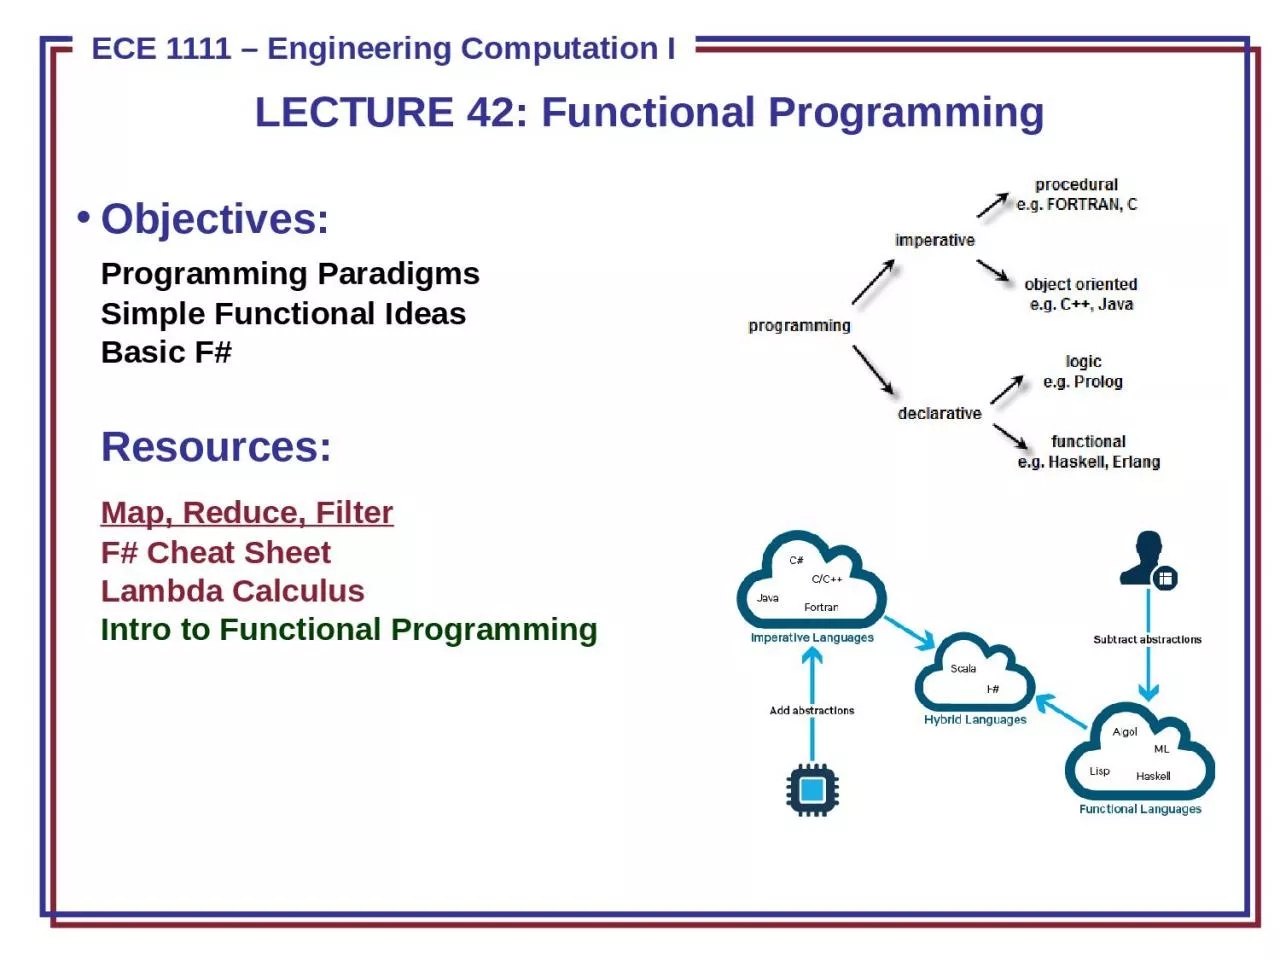 LECTURE 42: Functional Programming